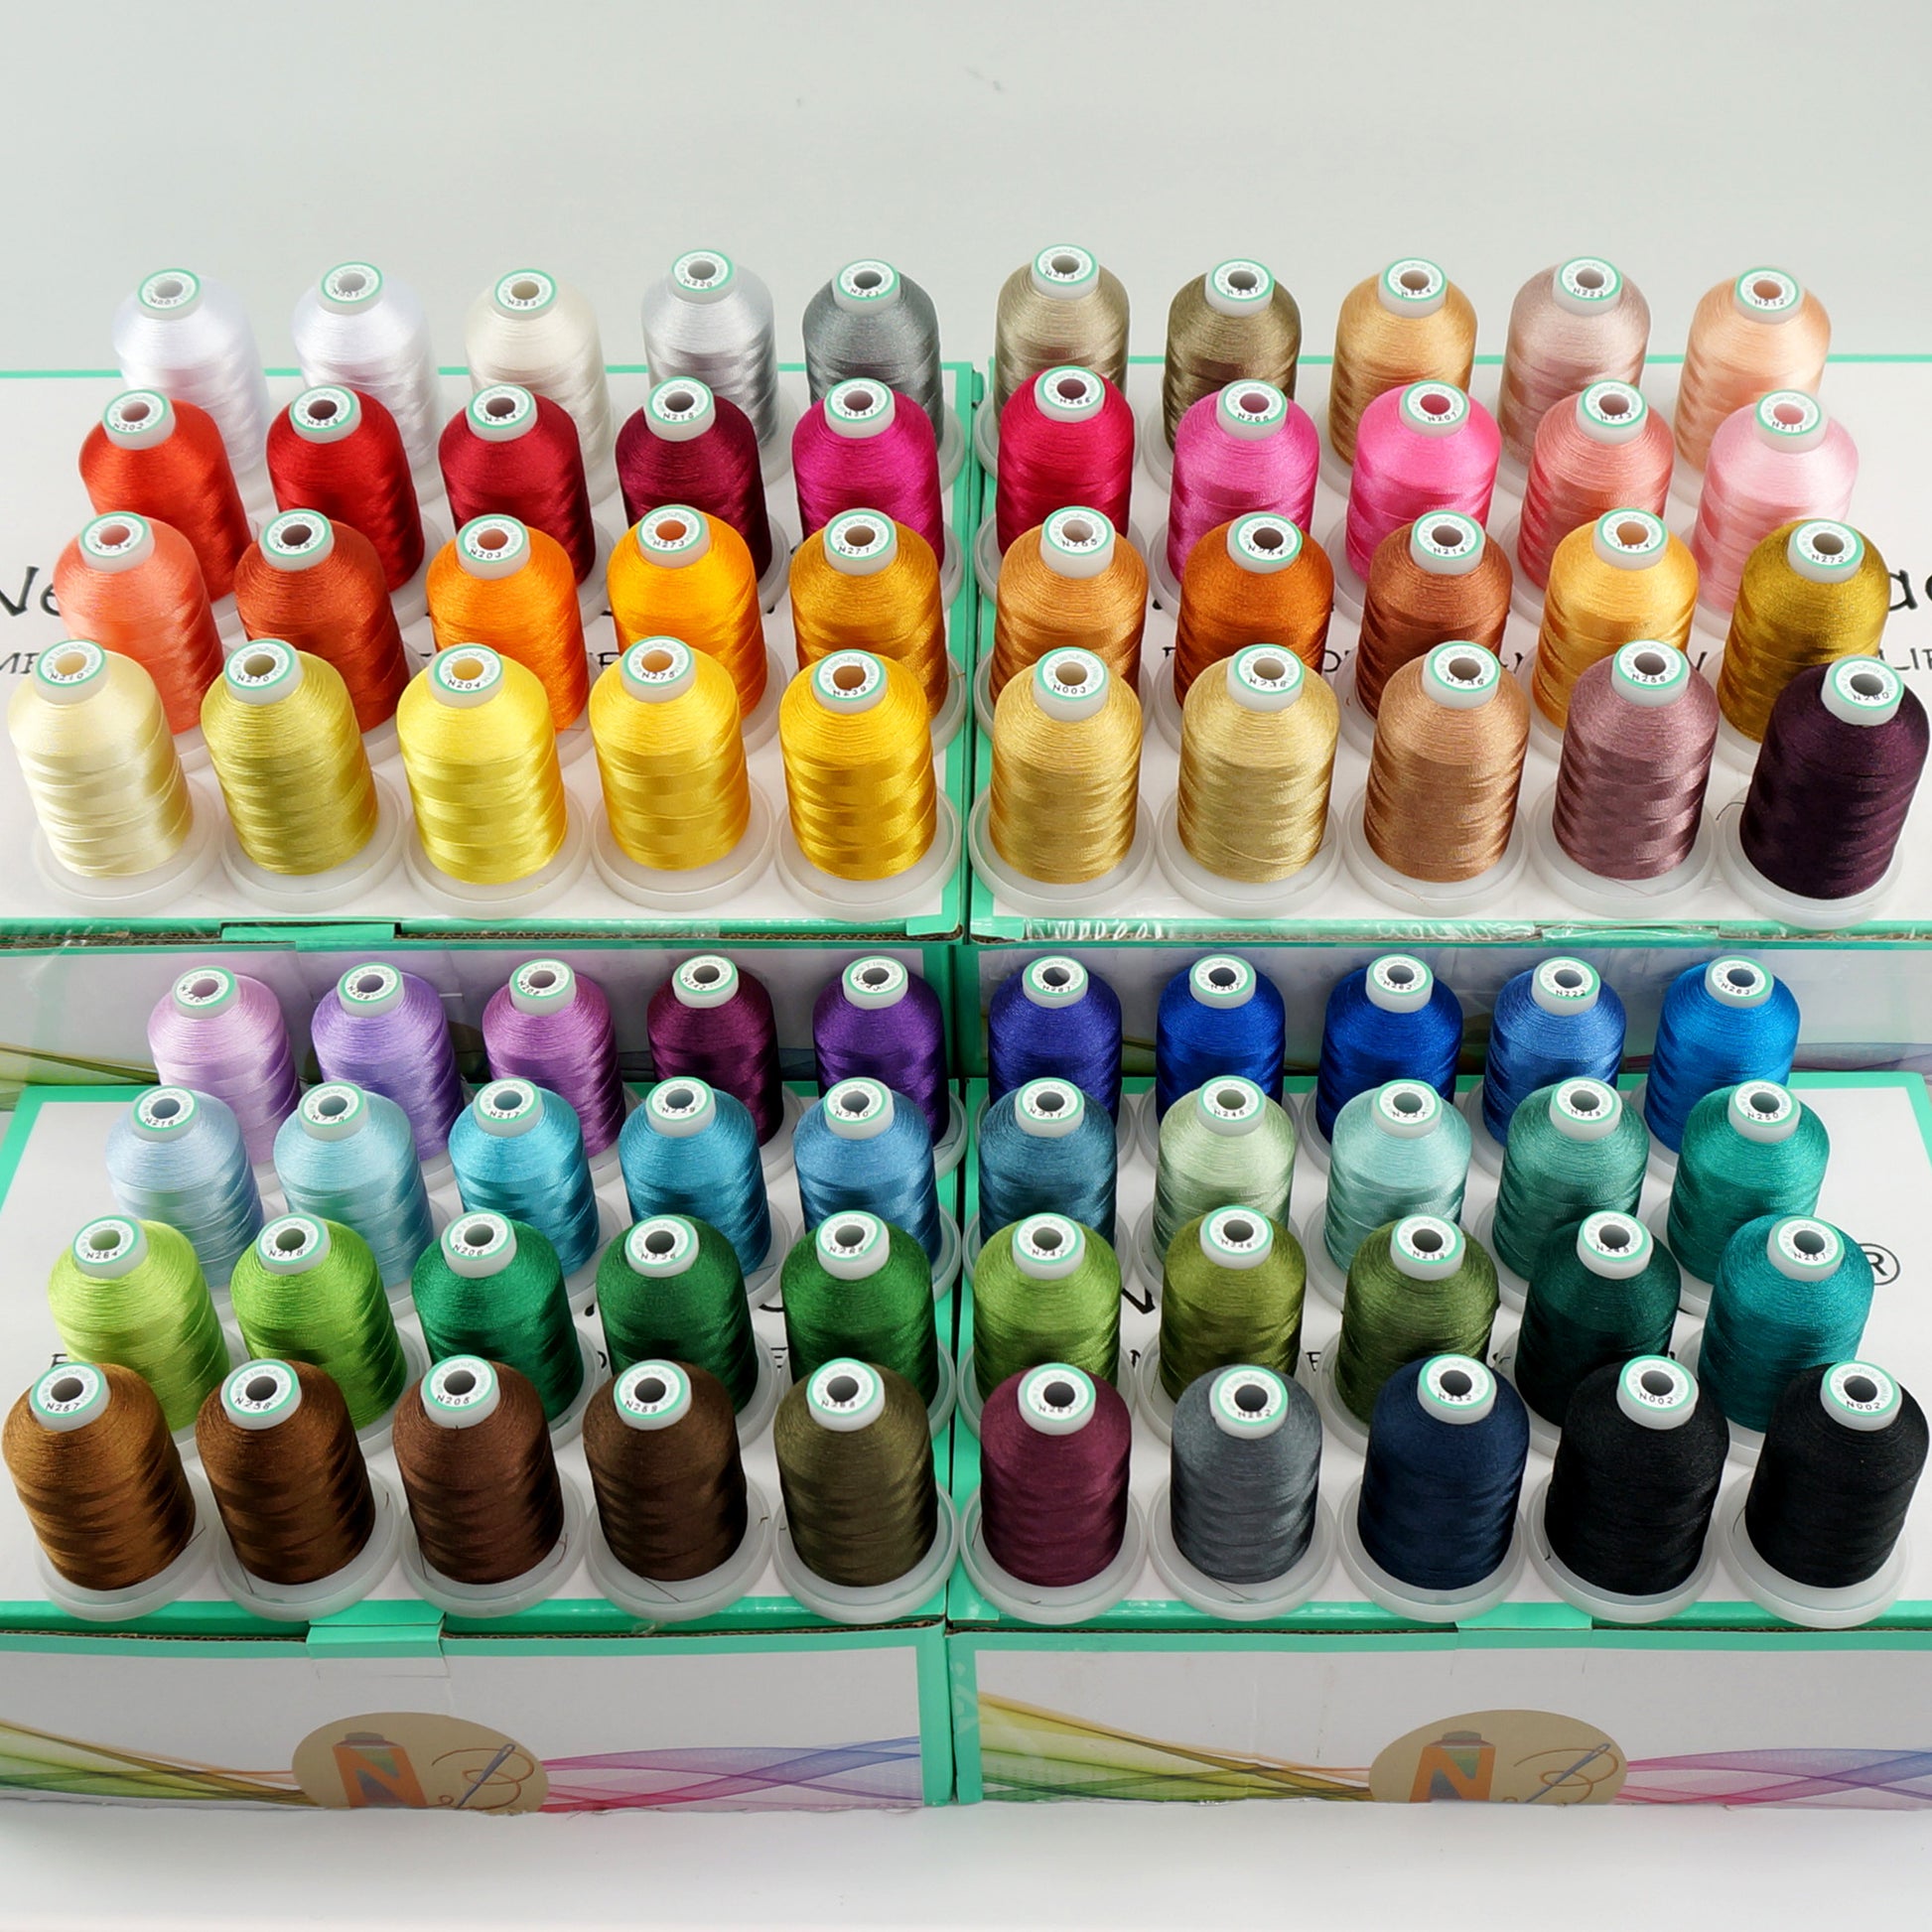 New brothread - 15 options - 8 Snap Spools of 1000M Each Polyester Machine Embroidery Thread with Clear Plastic Storage Box for Embroidery & Quilting